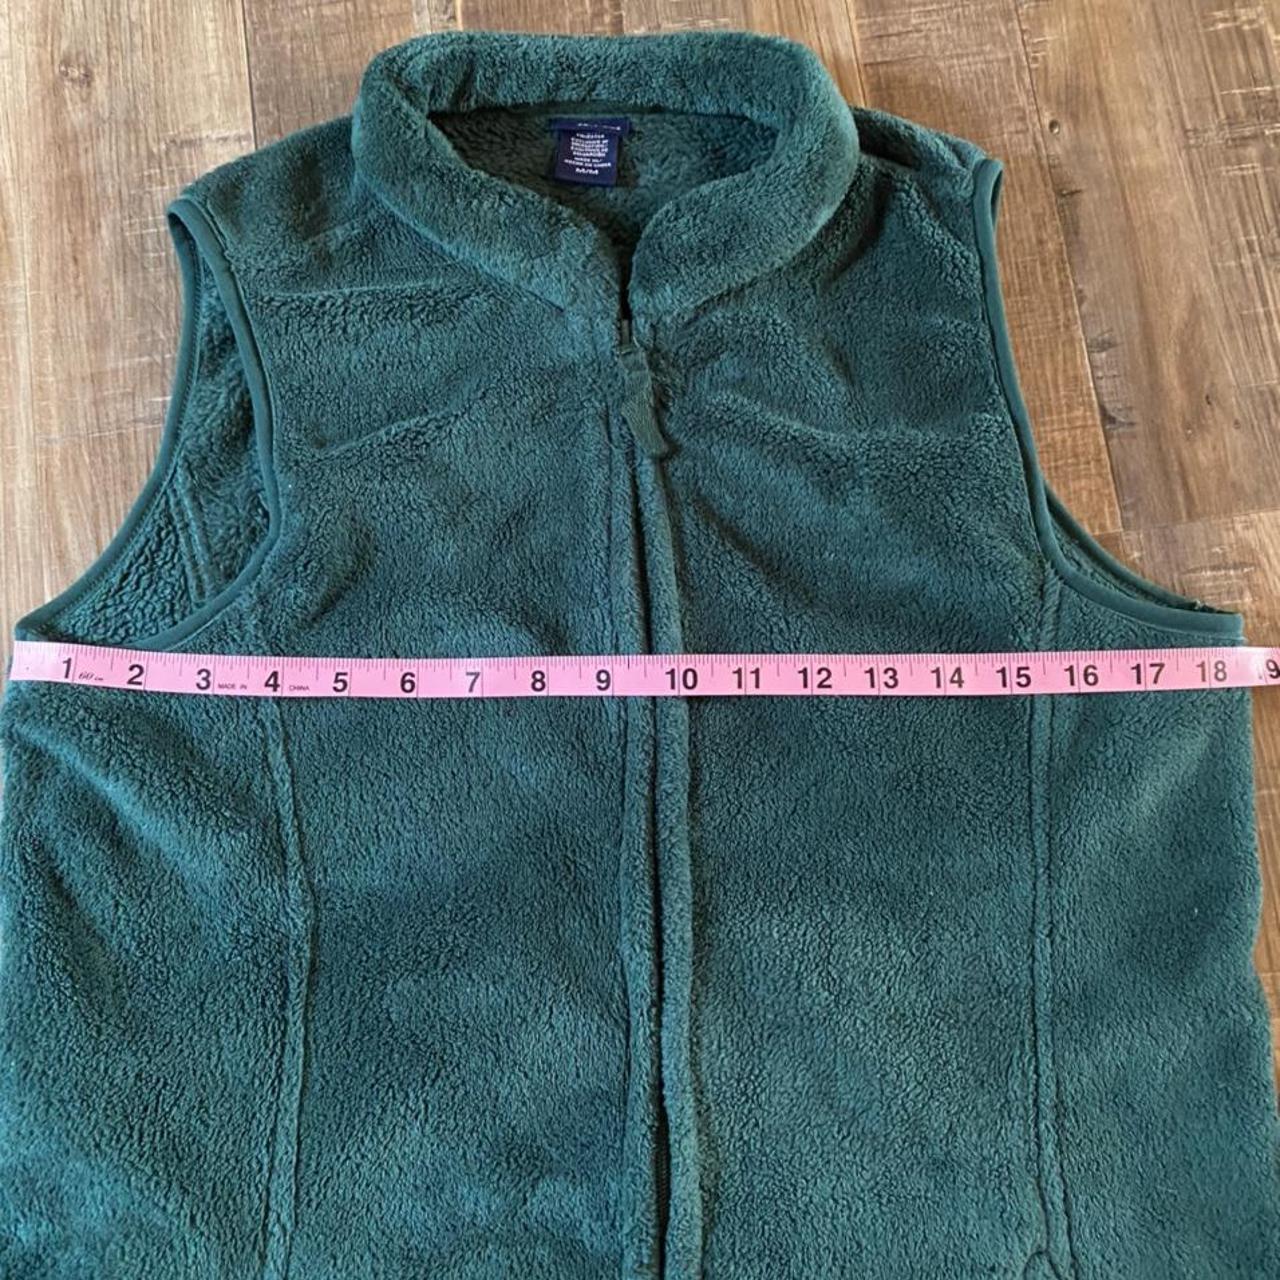 Product Image 2 - Teddy soft green sweater vest!🎄